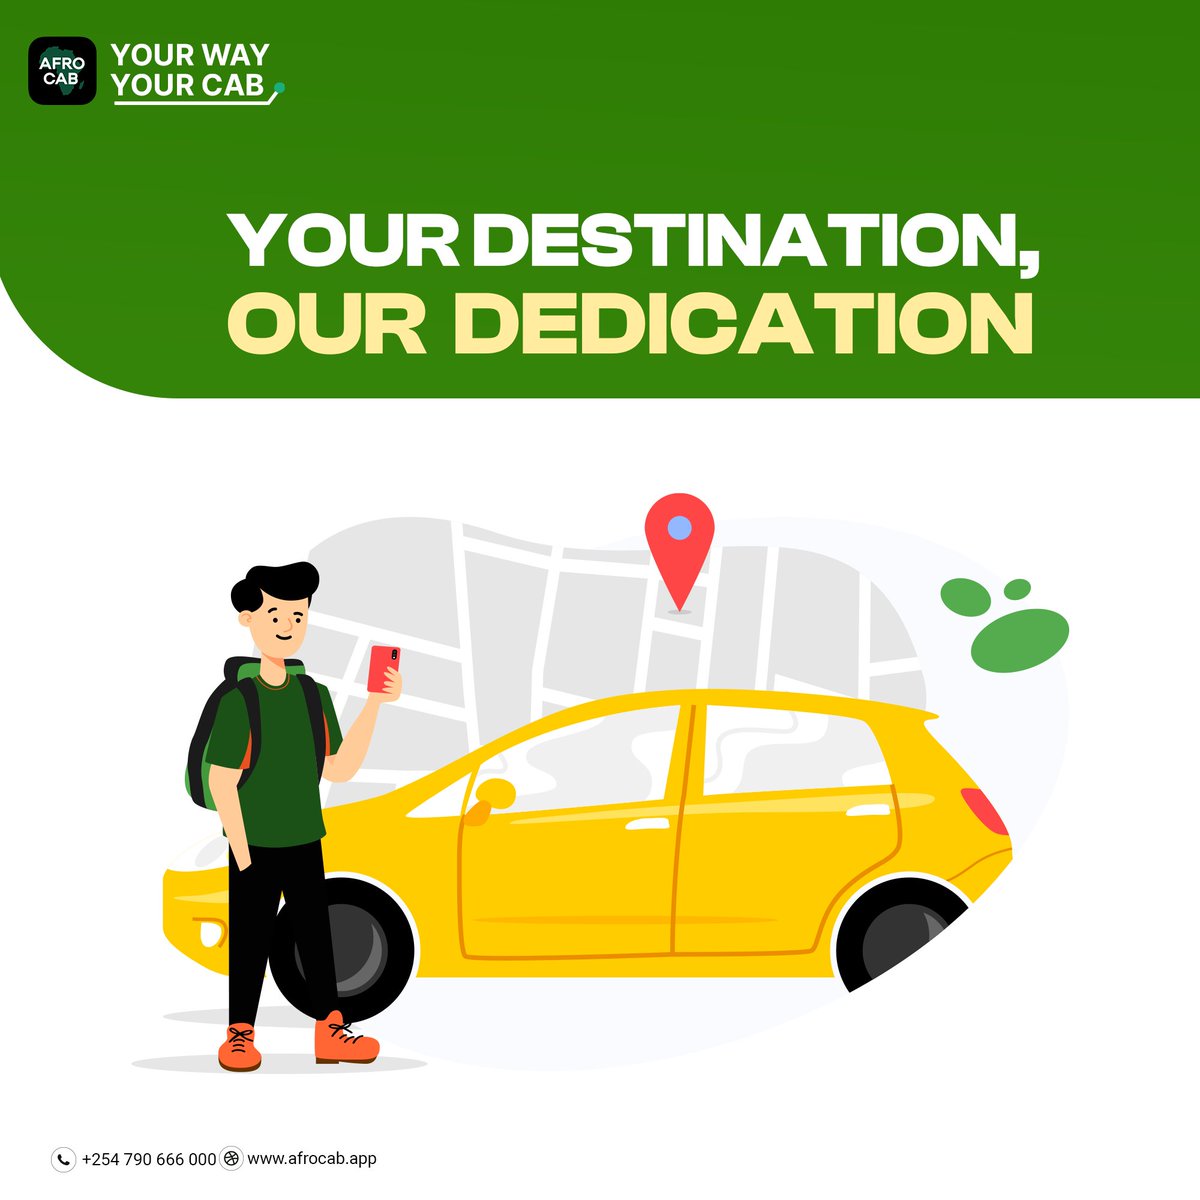 Your dreams and destinations are our top priority. We're dedicated to getting you there.

#taxibooking
#AfroCab
#AfricanTransport
#RideWithAfroCab
#TaxiBooking
#AfricanTravel
#SafeRides
#LocalTransport
#AfricaOnWheels
#ConvenientRides